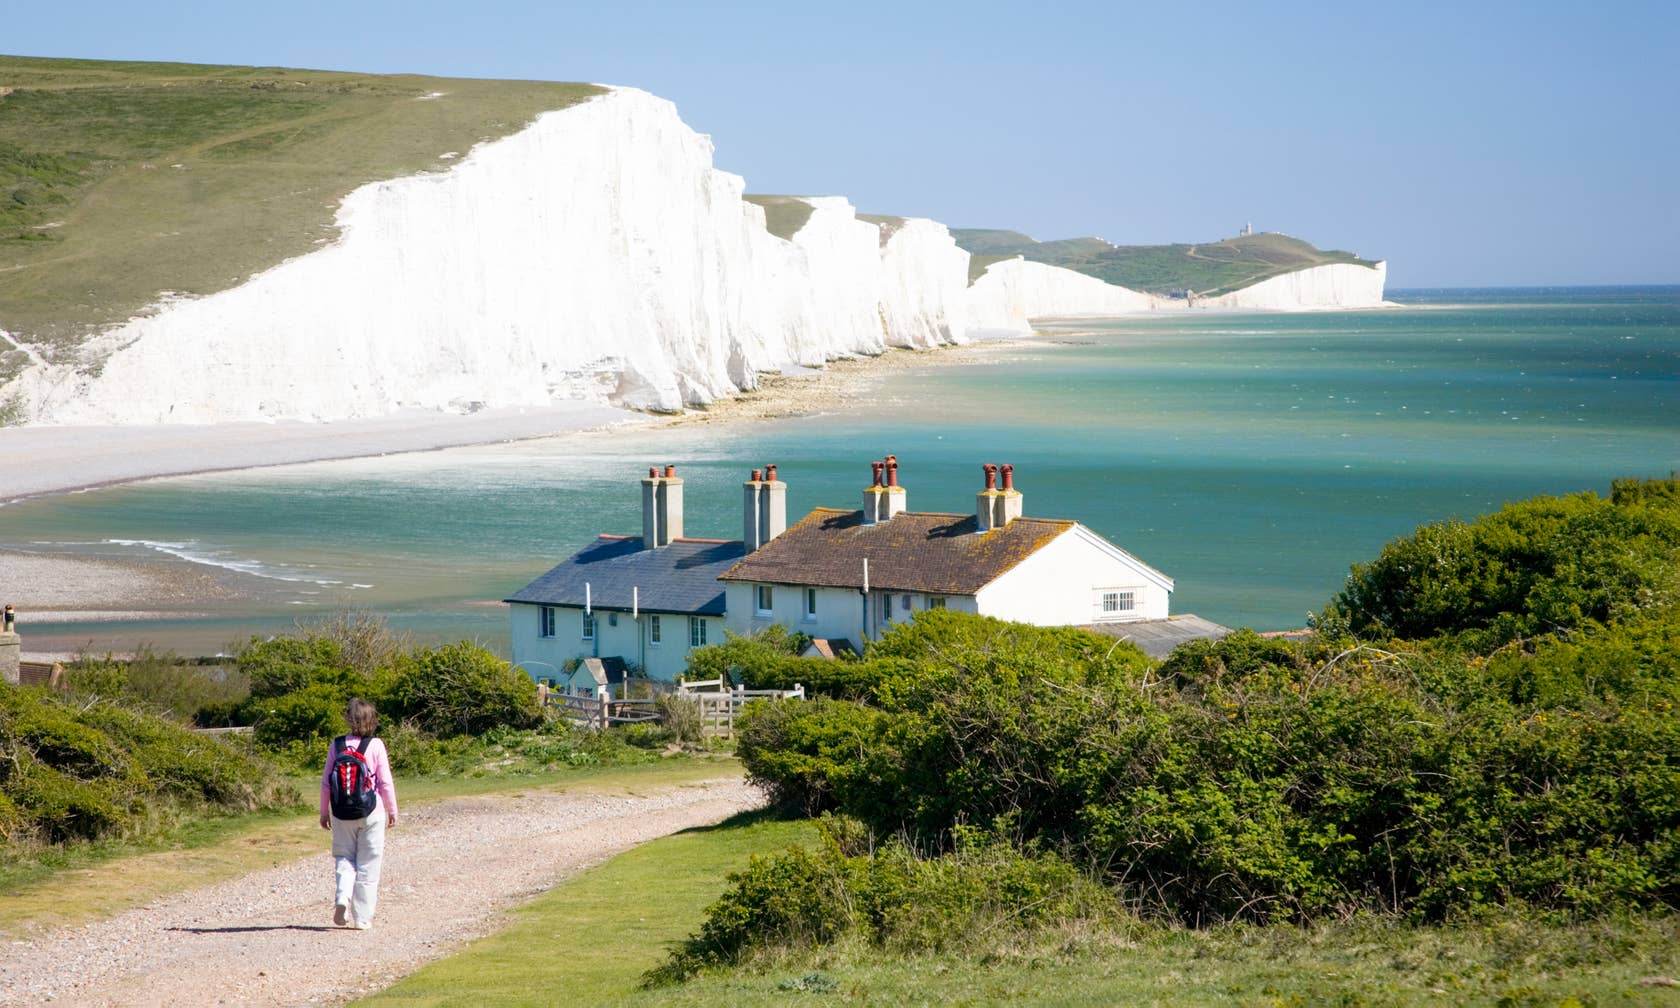 Holiday rentals in East Sussex